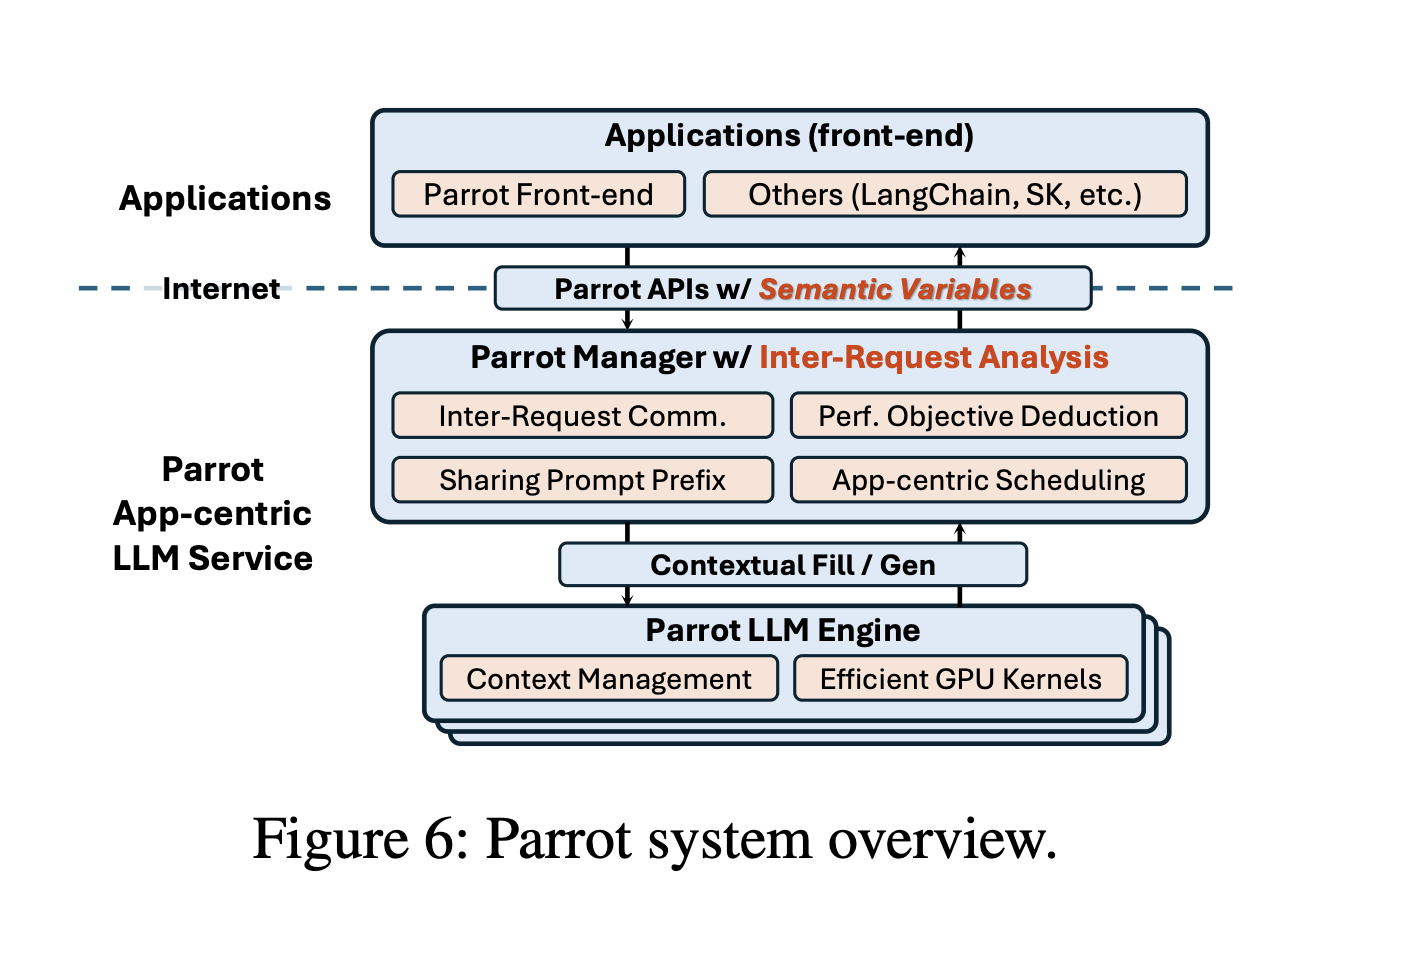  Parrot: Optimizing End-to-End Performance in LLM Applications Through Semantic Variables